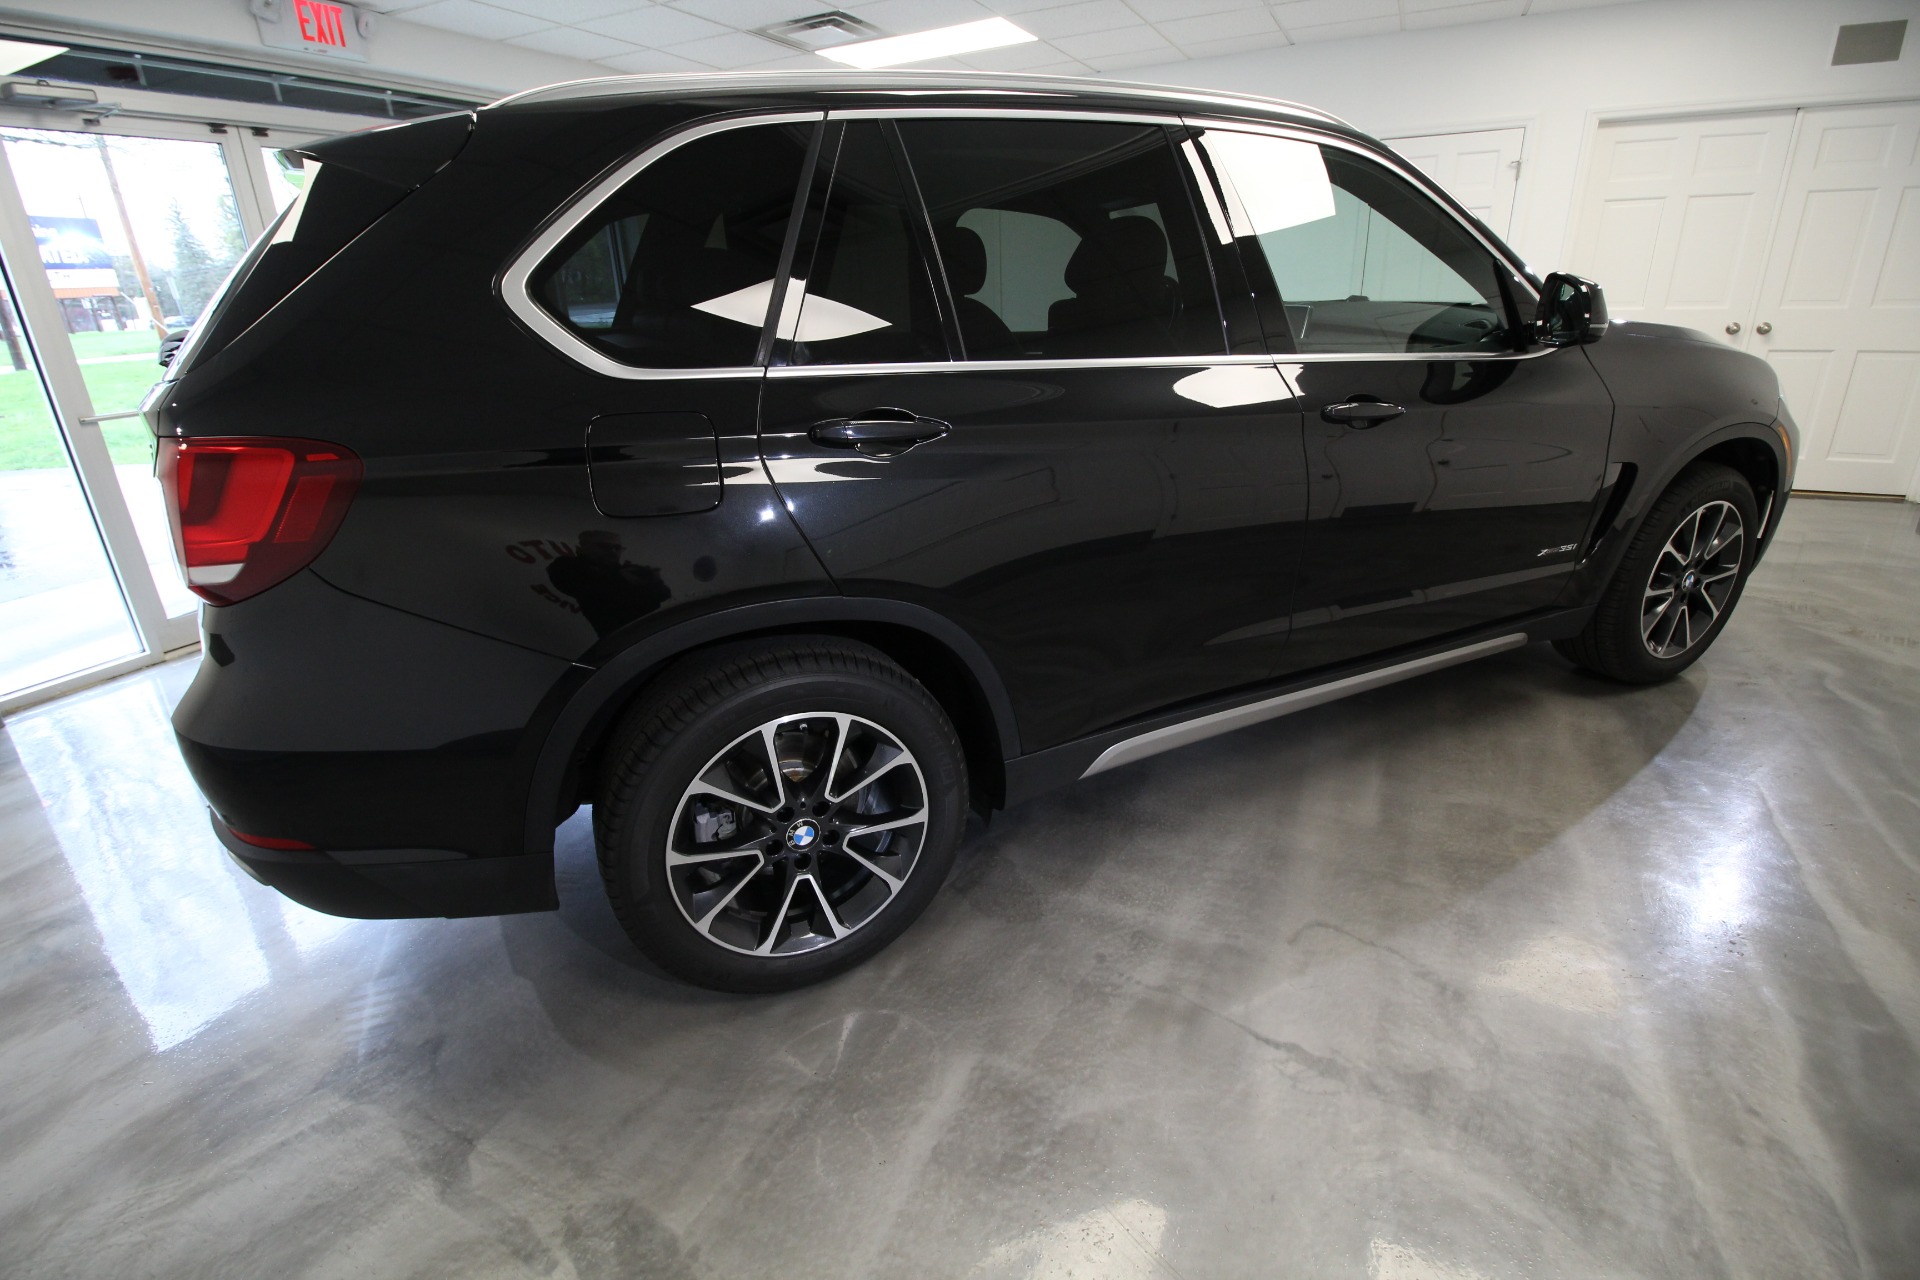 Used 2017 Black Sapphire Metallic BMW X5 xDrive35i LOADED WITH OPTIONS VERY CLEAN | Albany, NY